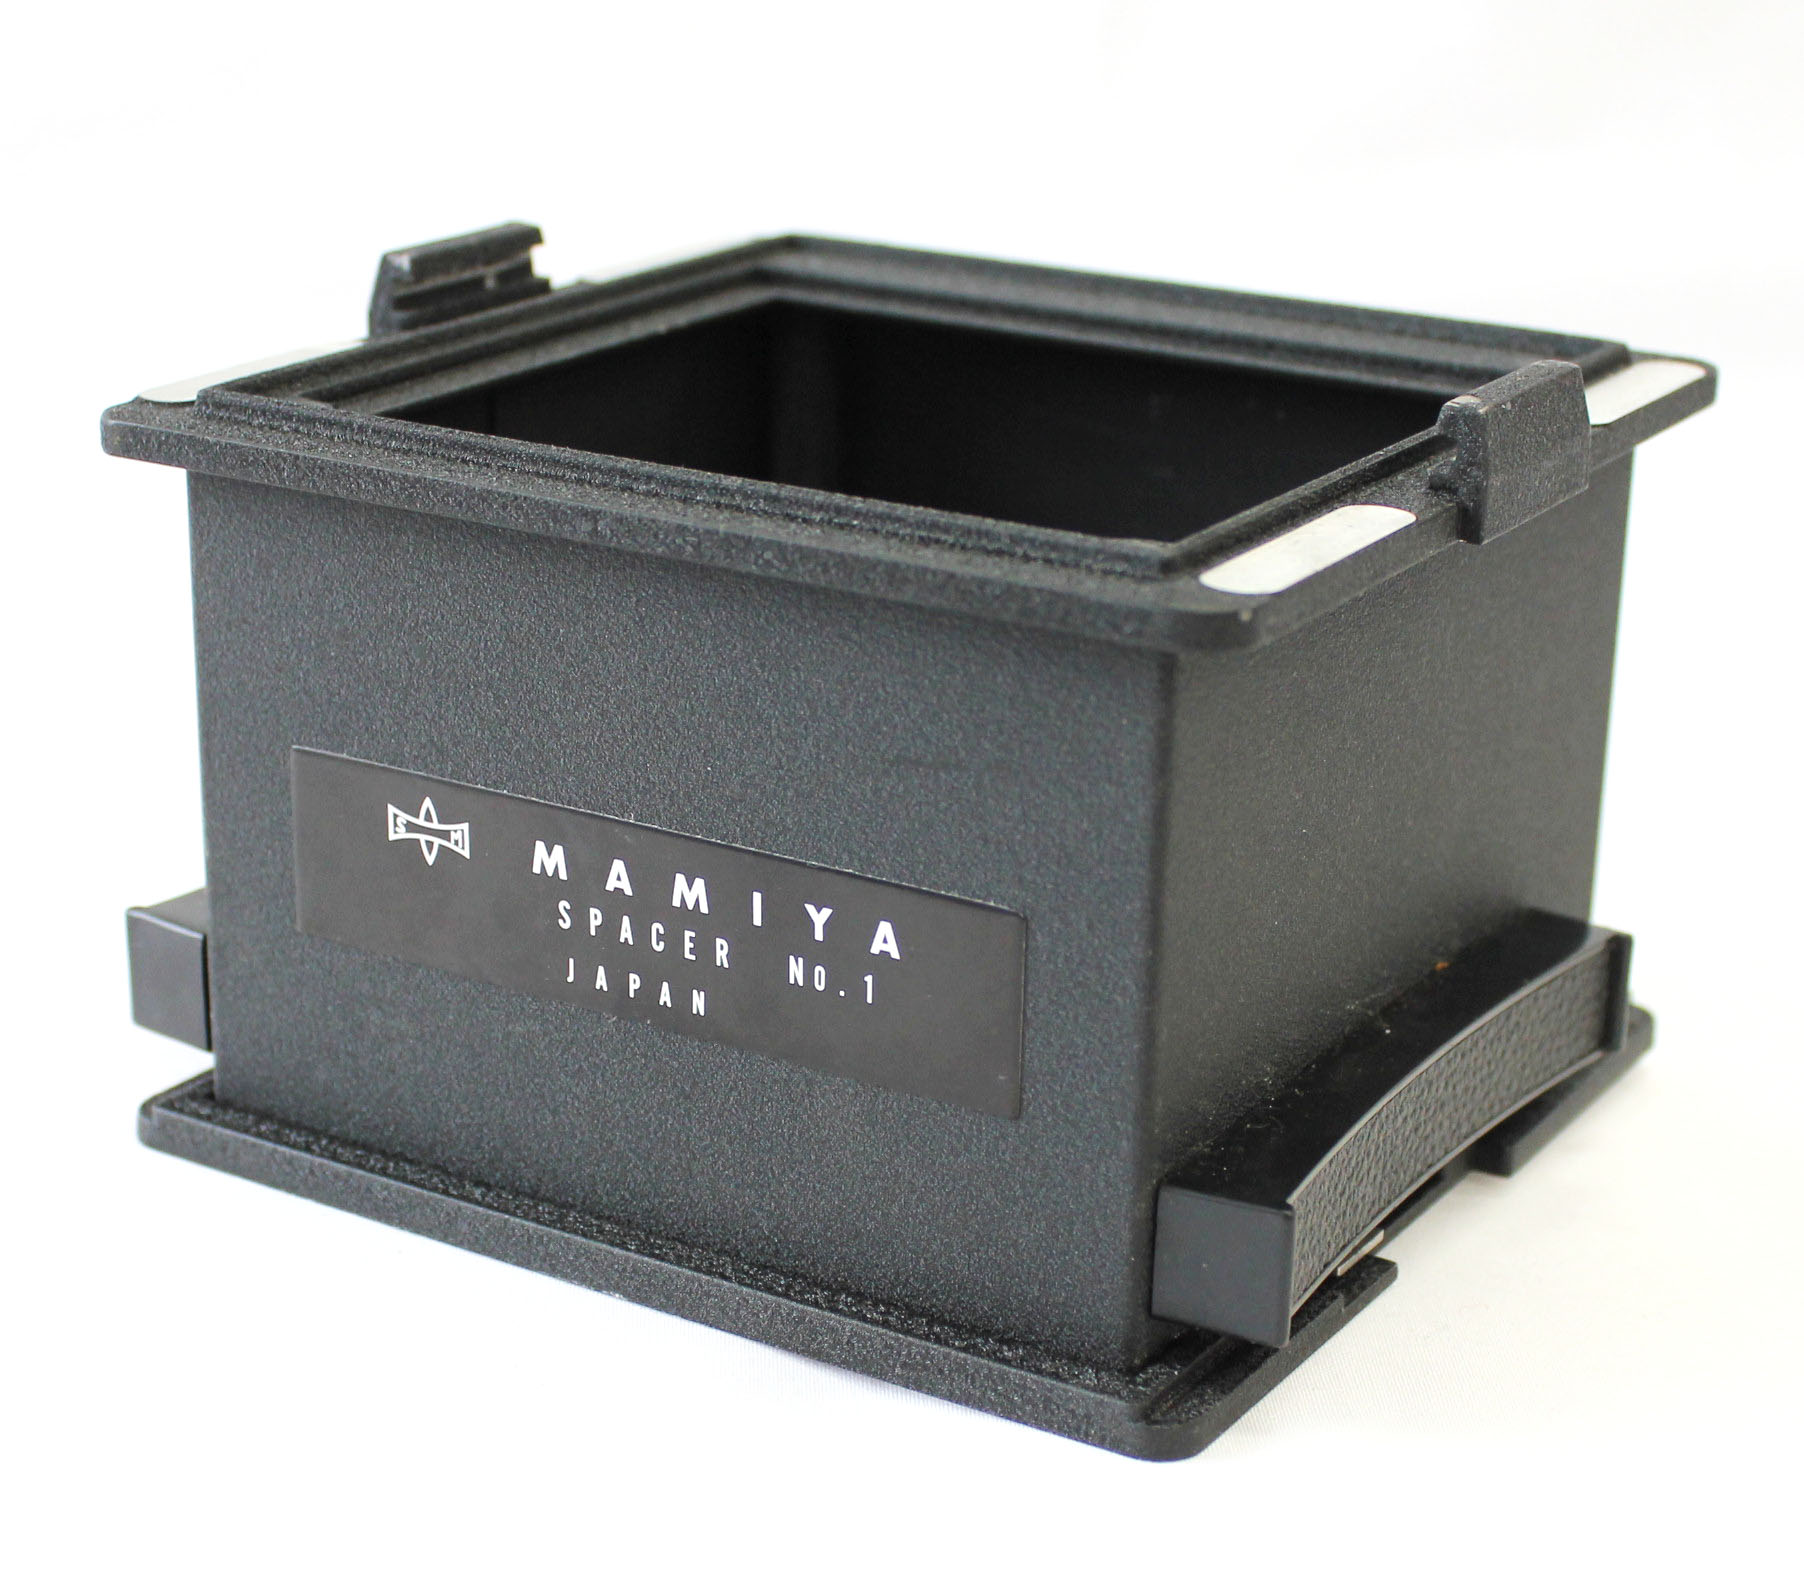 Mamiya Spacer No.1 for Universal Press Super 23 from Japan